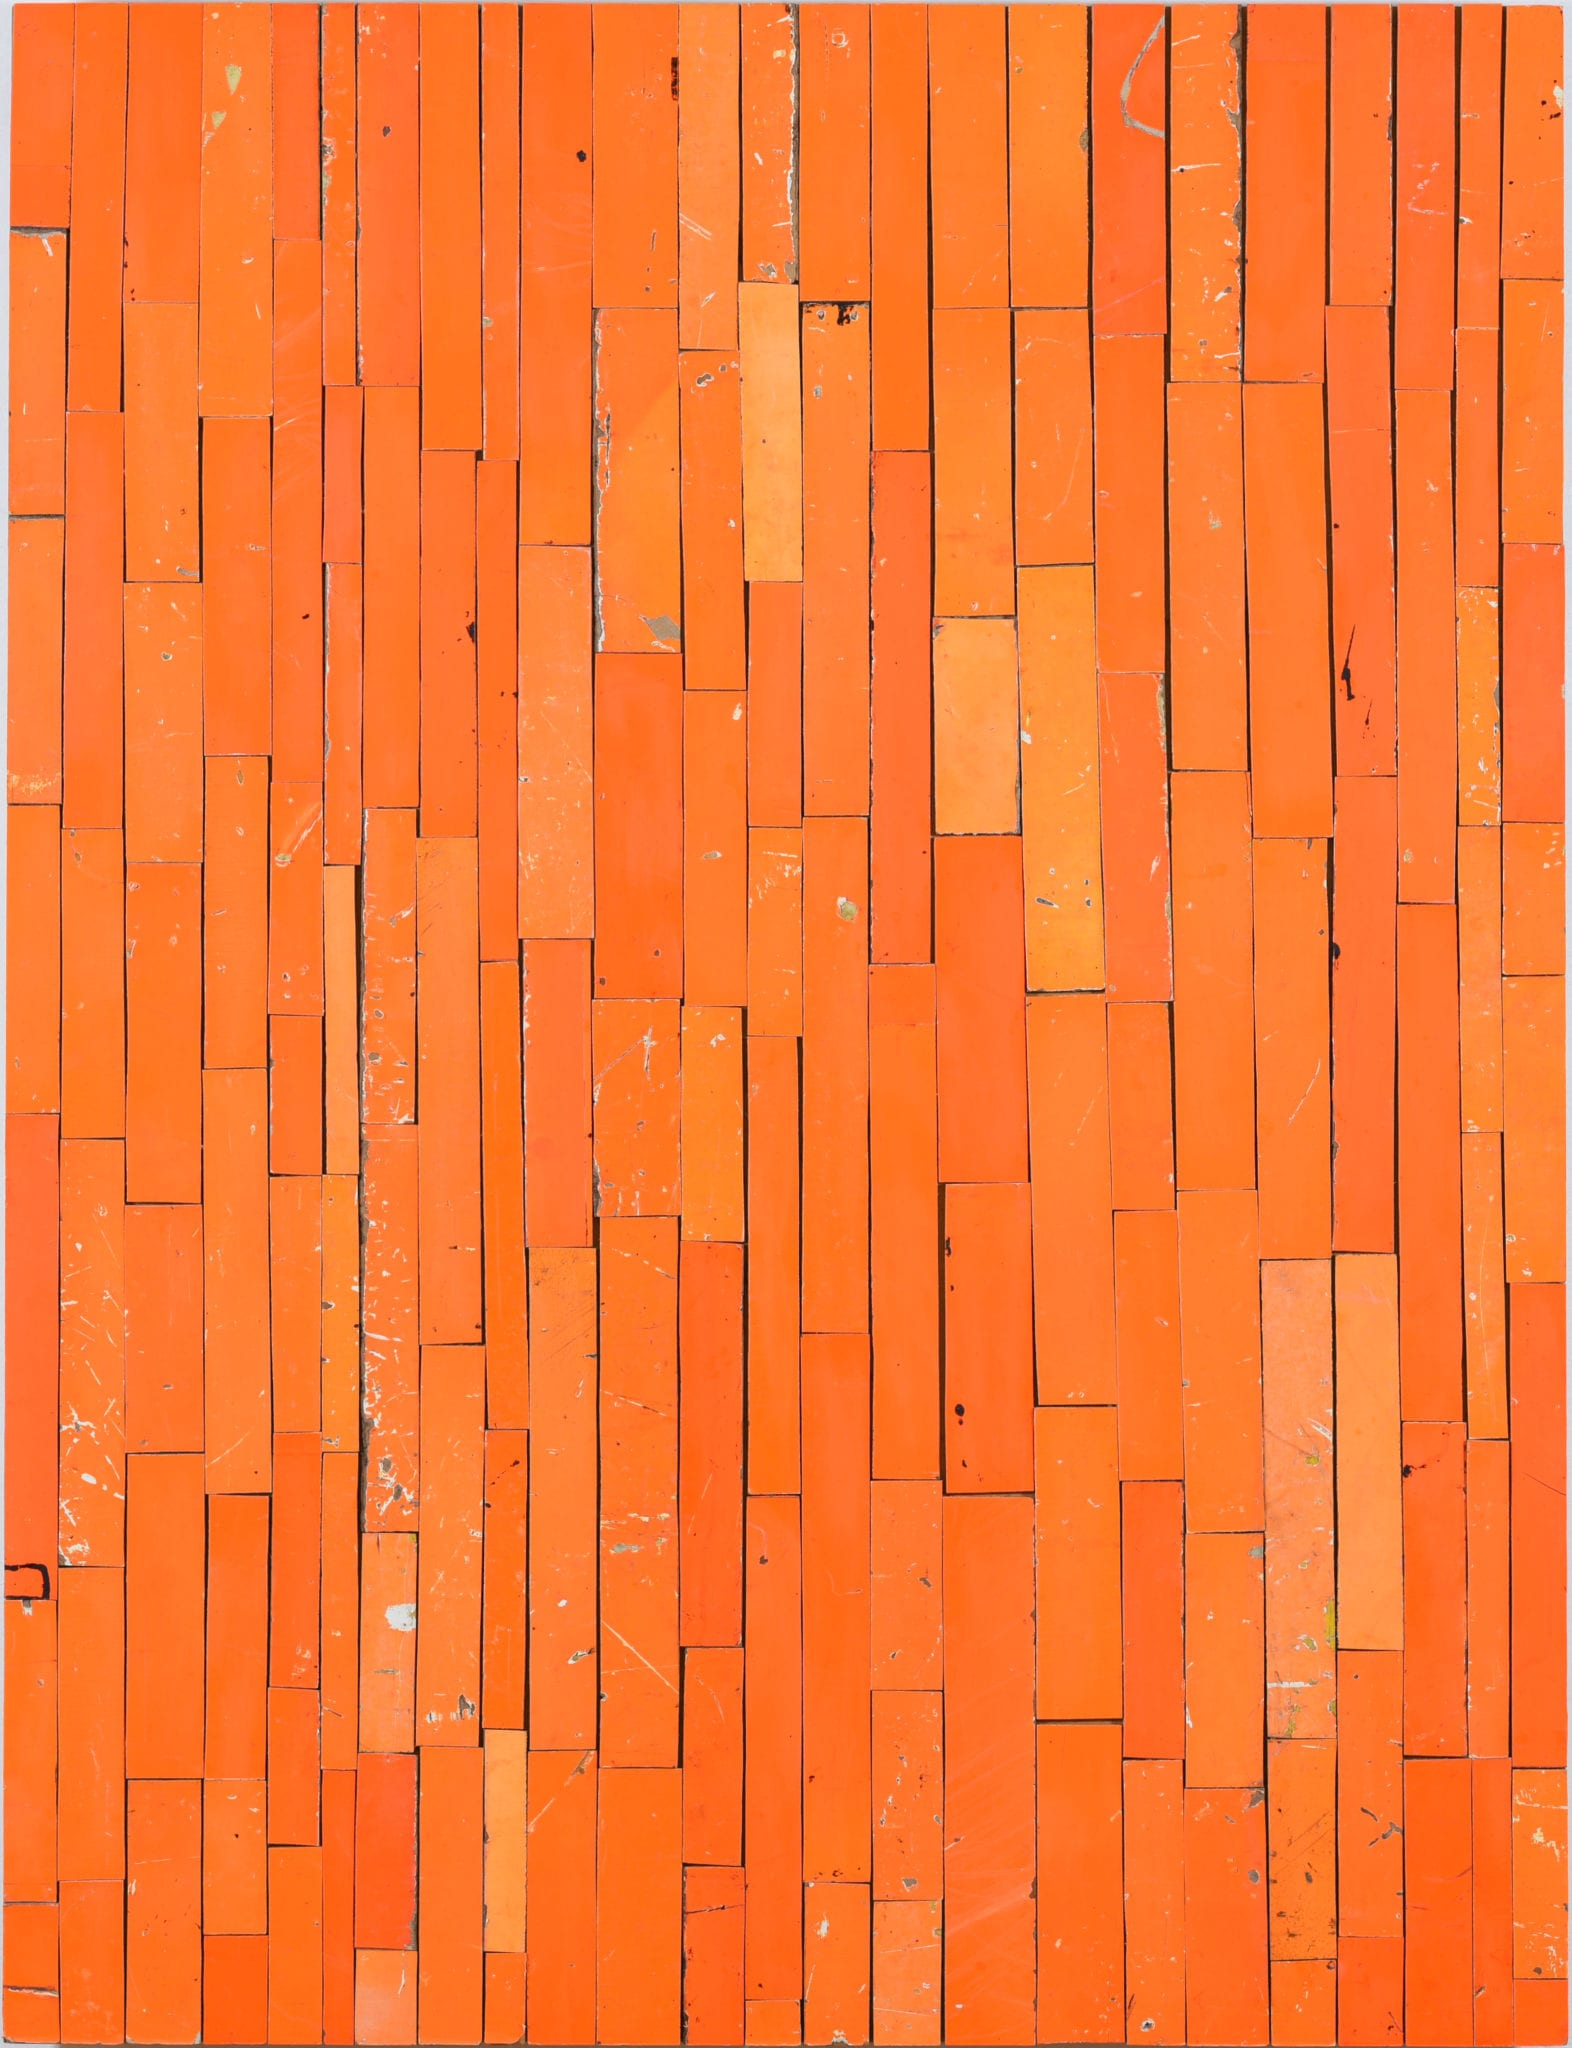 Rosalie Gascoigne, Firebird, 1991, Retro-reflective tape on ply on composition board, 134 x 103 cm, Latrobe Regional Gallery Collection, gift of the Bank of Melbourne Regional Art Collection through the Australian Cultural Gifts Program, 1997.